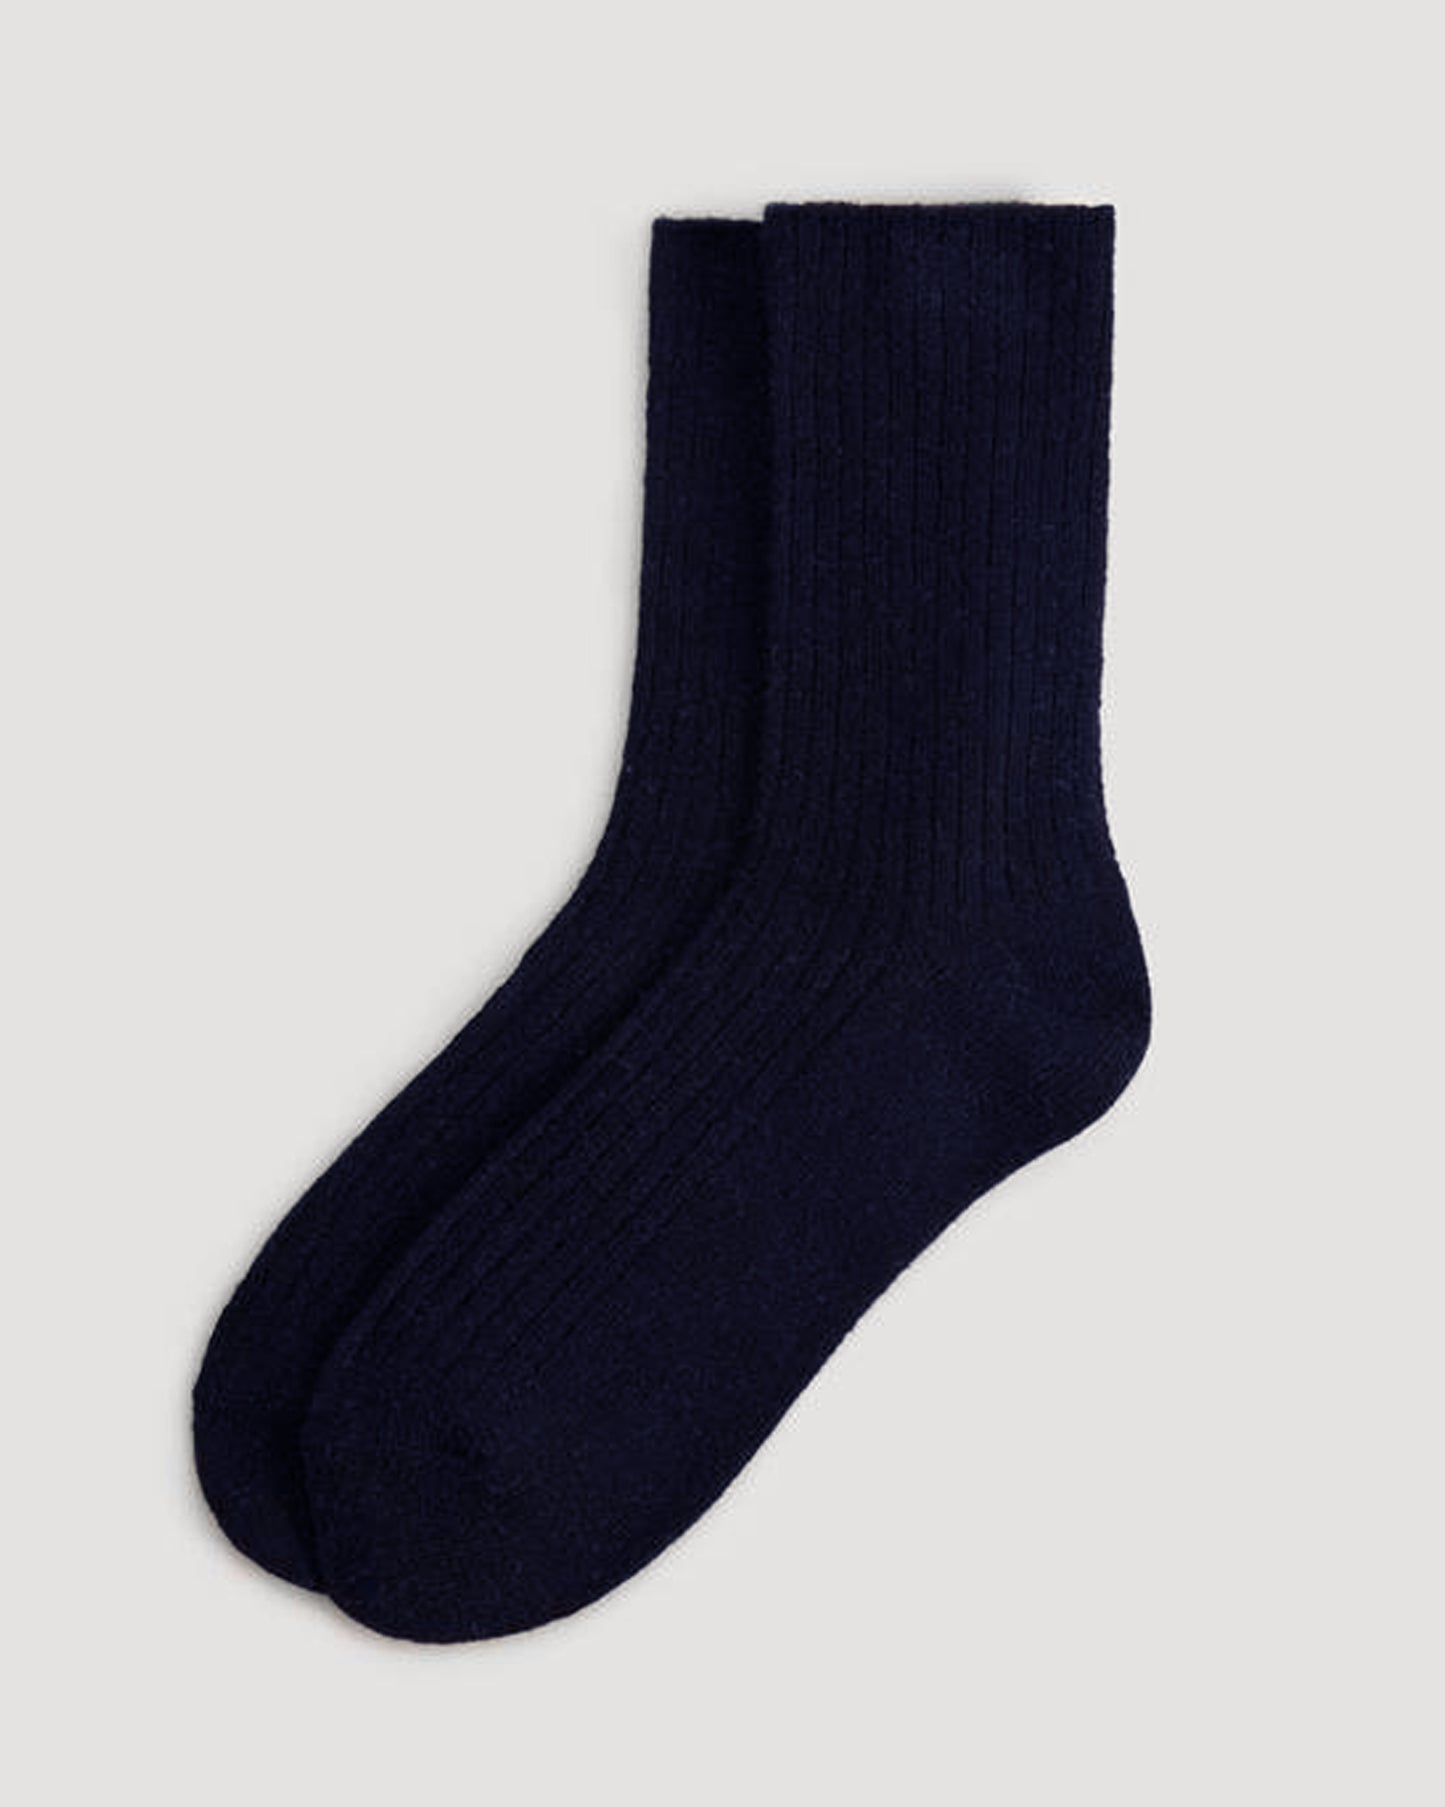 Ysabel Mora 12853 No Cuff Wool Sock - Navy blue soft and warm wool ribbed knitted thermal socks with no cuff, shaped heel and flat toe seam.